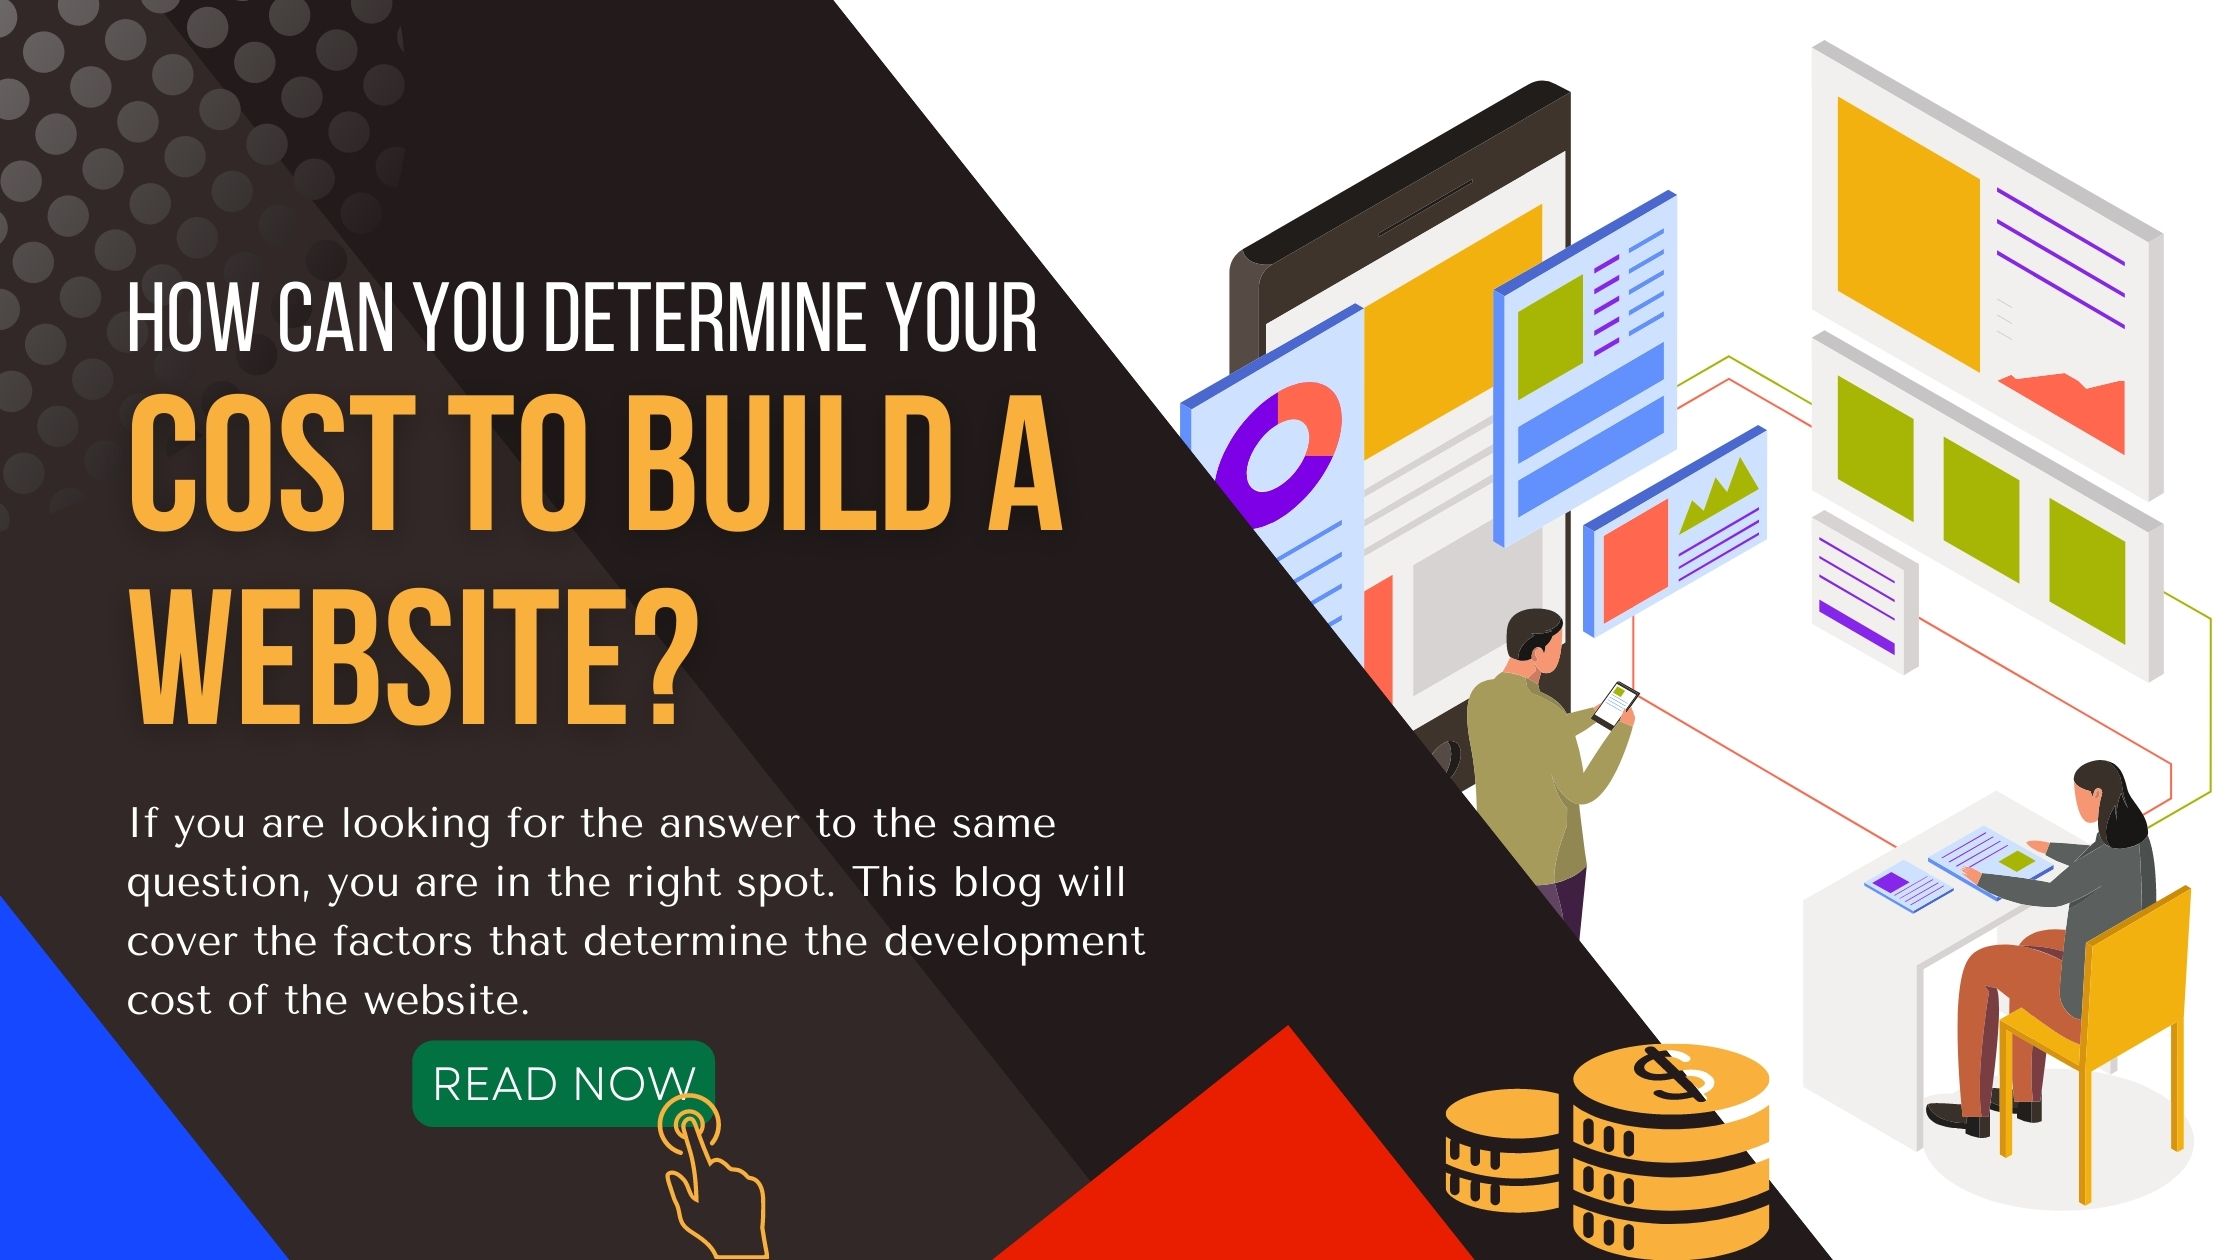 How Can You Determine Your Cost to Build a Website?